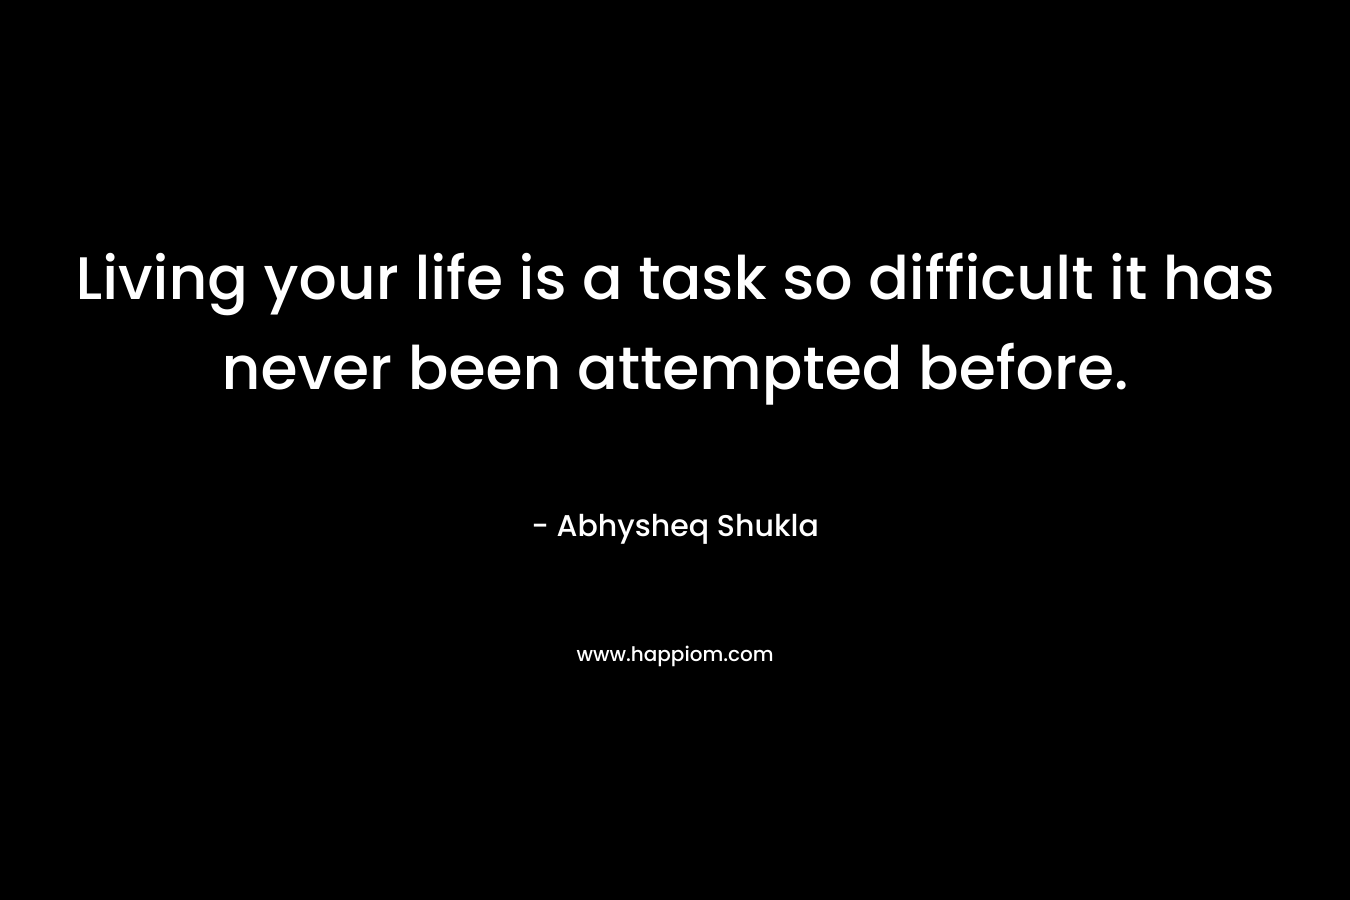 Living your life is a task so difficult it has never been attempted before.